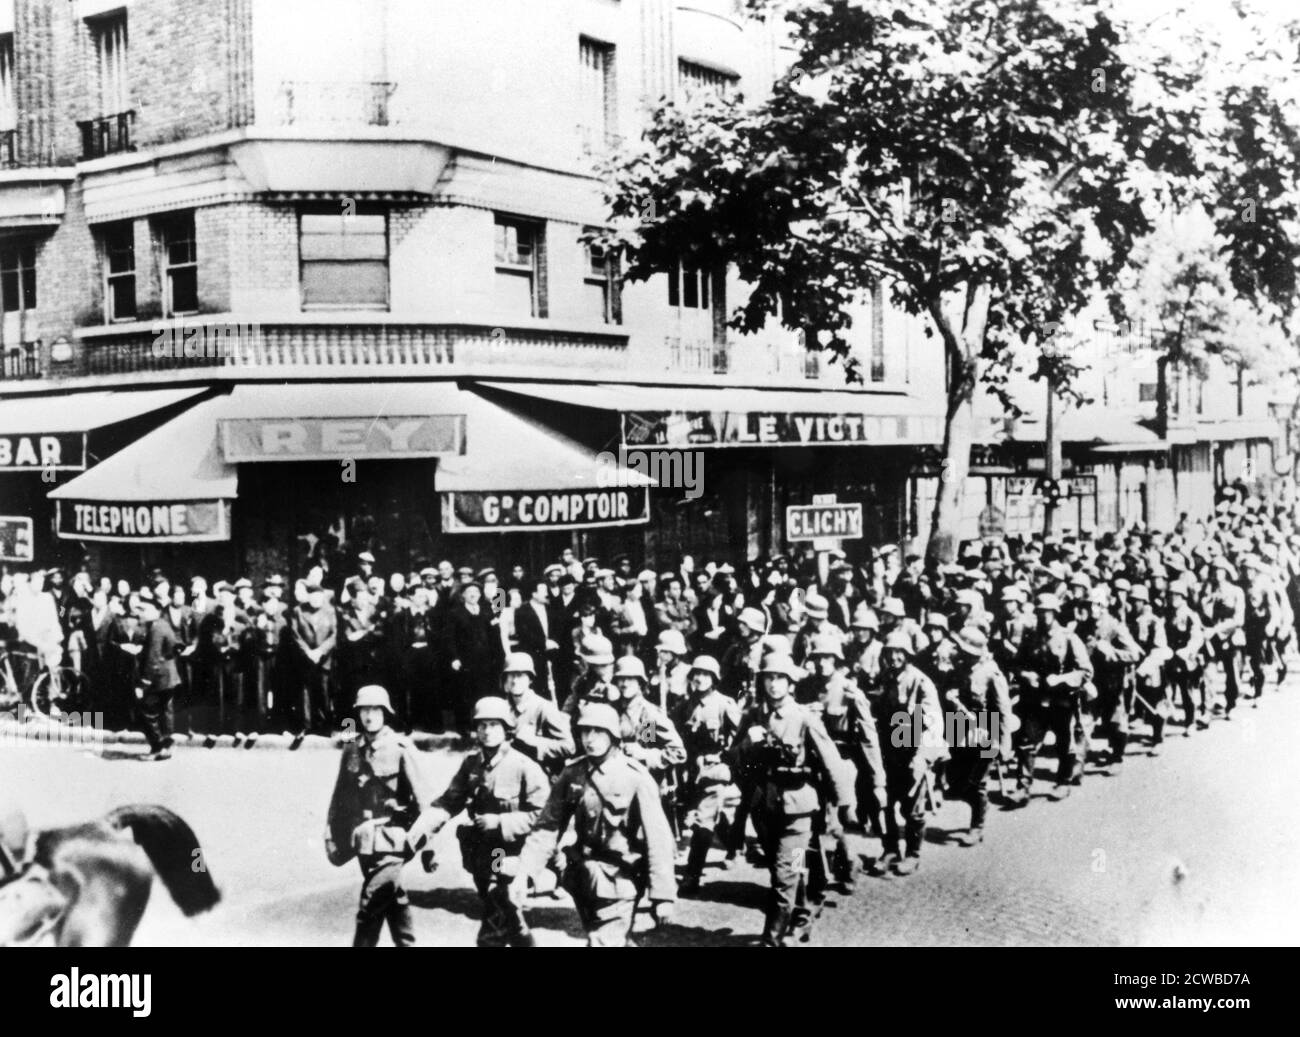 Arrival of the first German troops in Paris, June 1940. The Germans entered Paris, which had been declared an open city by the departing French government, on 14 June, at the start of a four year occupation. The photographer is unknown. Stock Photo